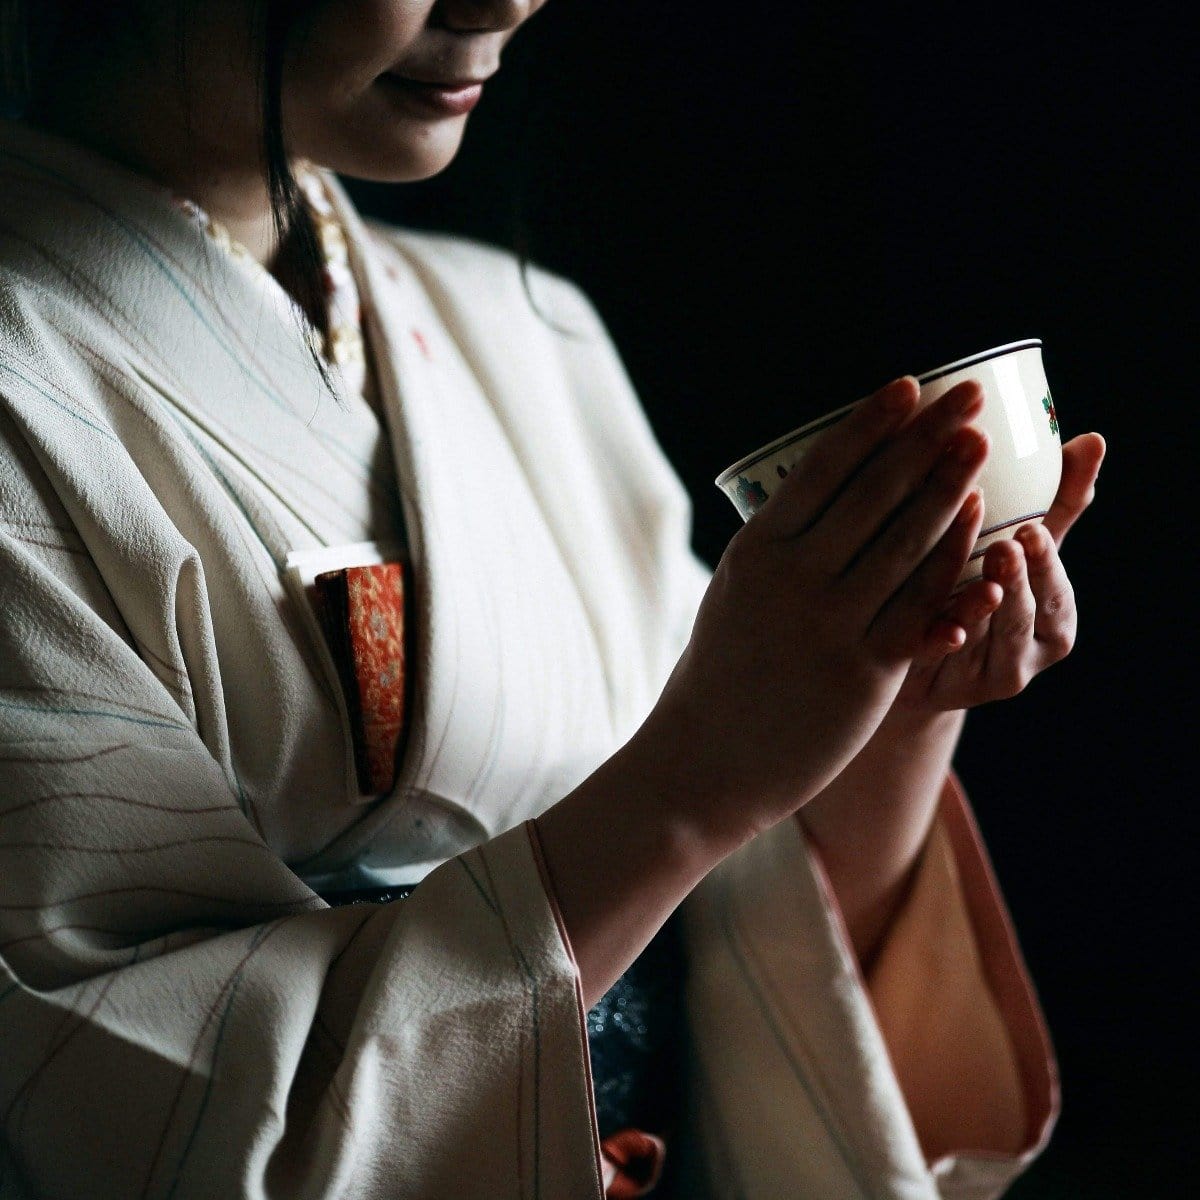 A person dressed in a traditional Japanese kimono is holding a ceramic bowl of Kansai-Kyoto Ceremonial Matcha by Magic Hour with both hands. The image is dimly lit, focusing on the serene and delicate gesture, with the individual’s face partially visible.